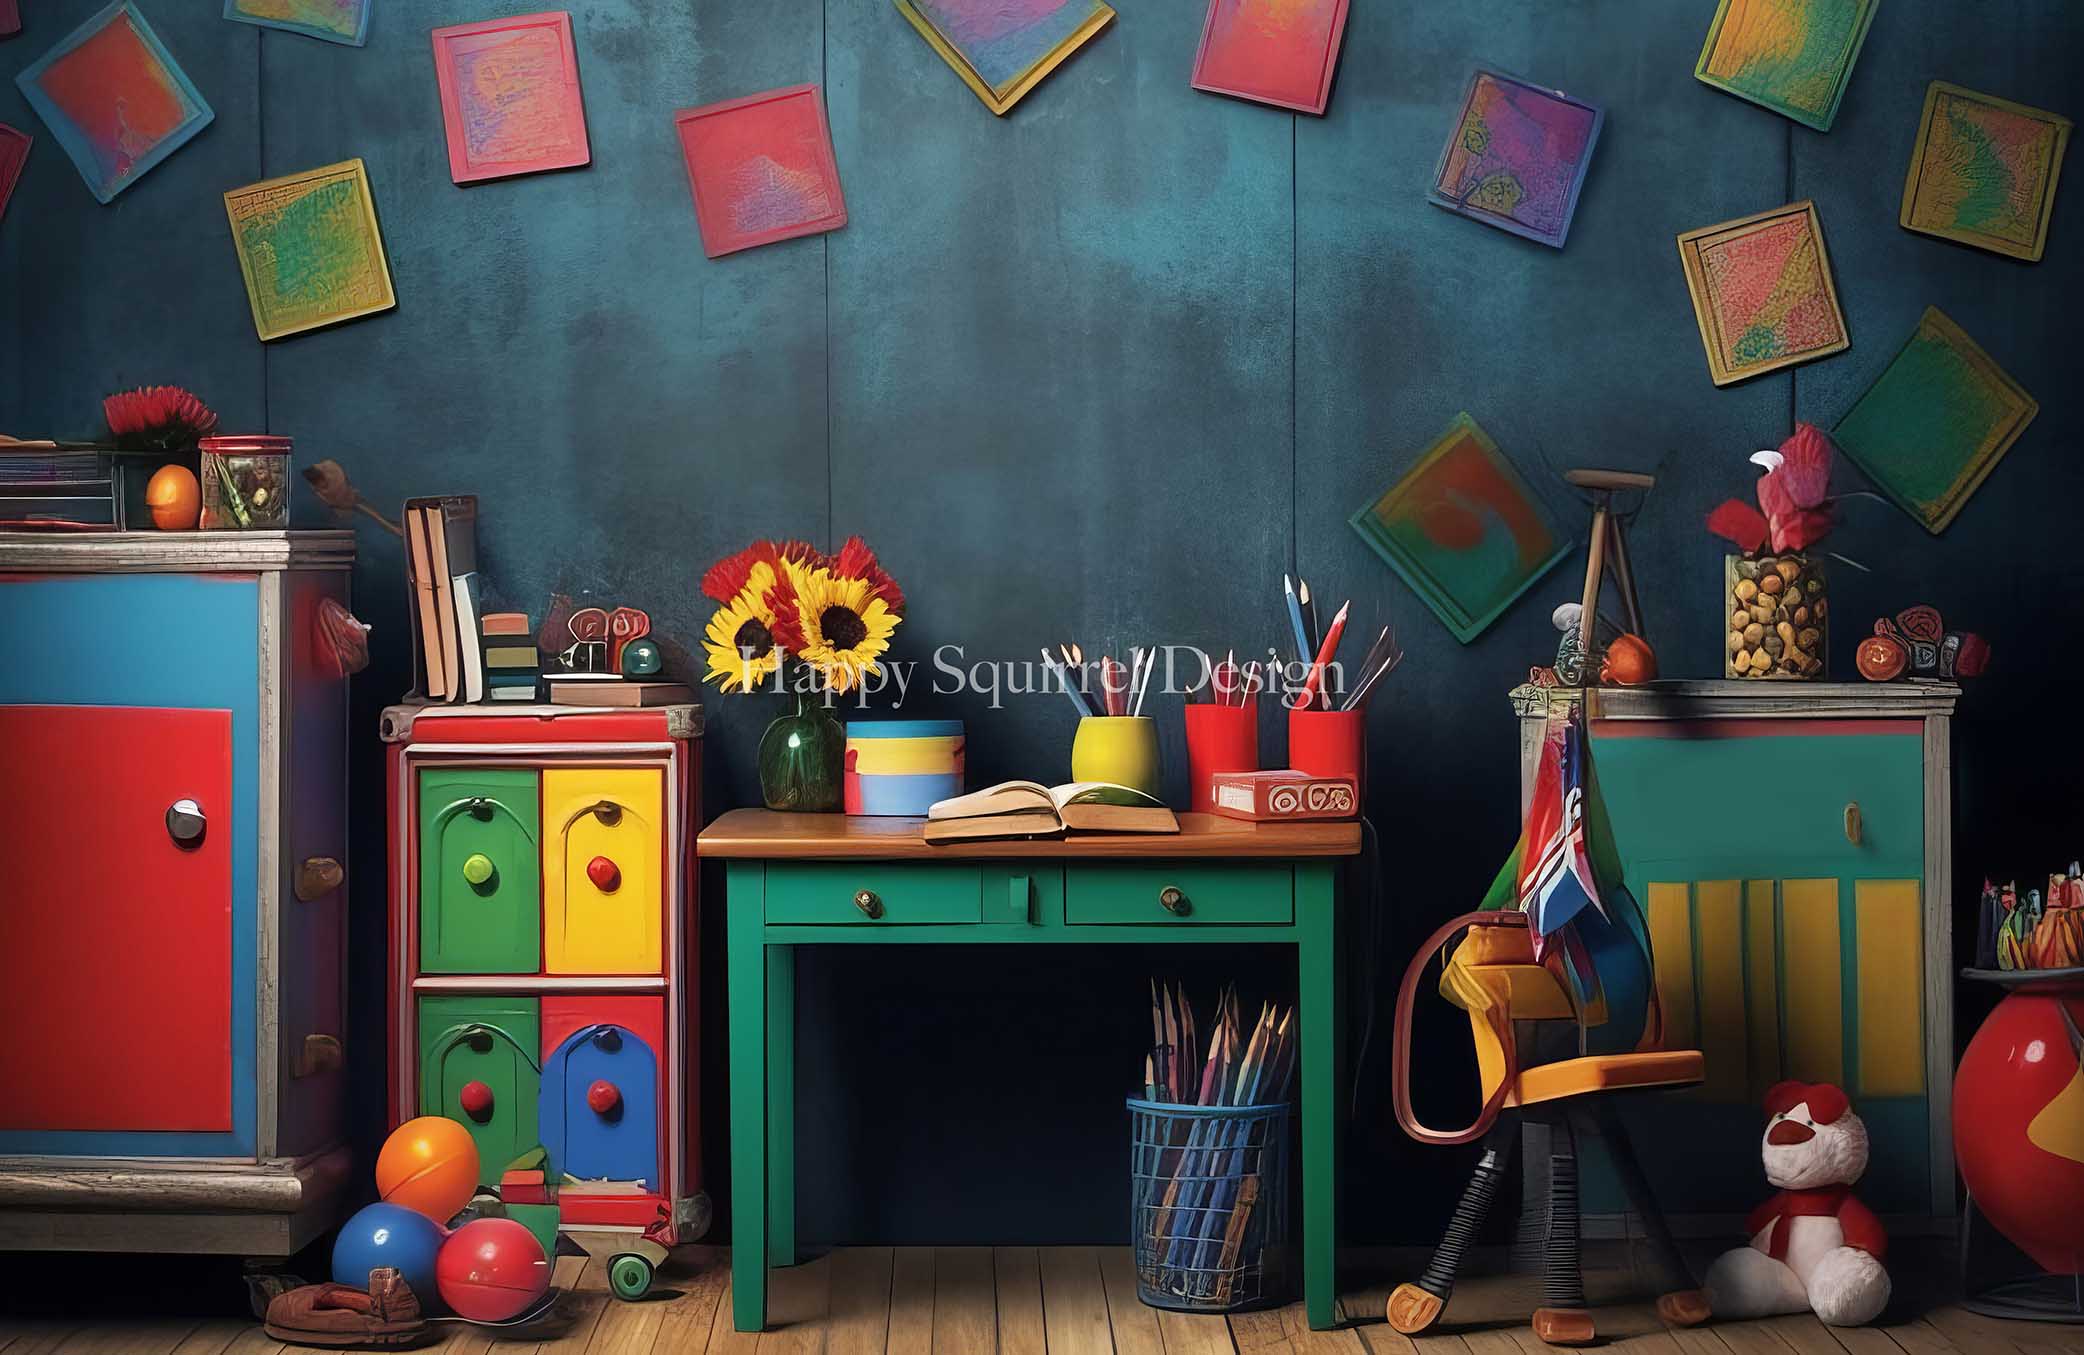 Kate Colorful Classroom Backdrop Designed by Happy Squirrel Design